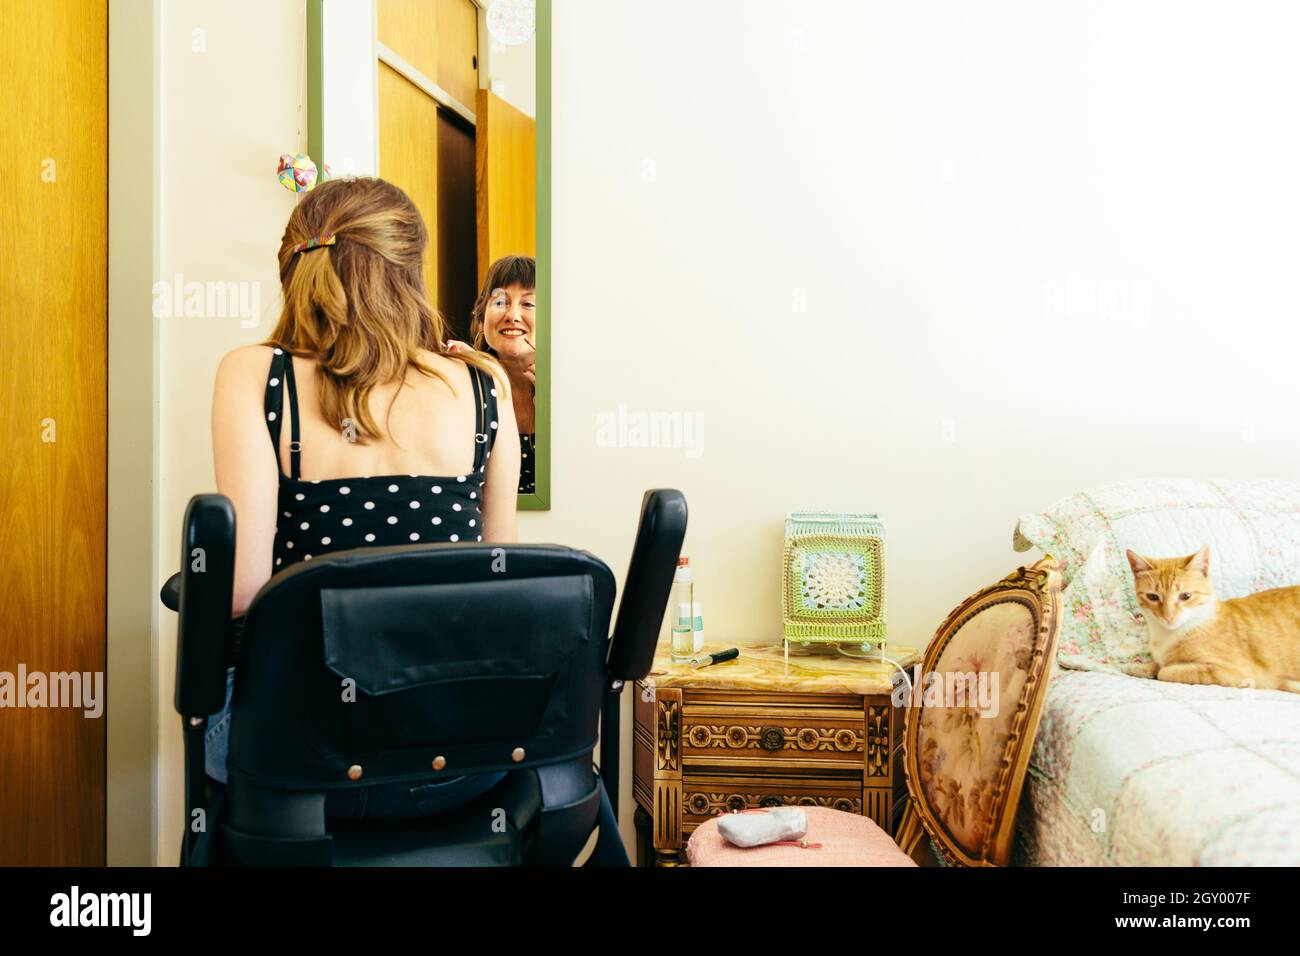 Woman in a wheelchair scooter putting on makeup in front of a mirror. Copy space. Stock Photo